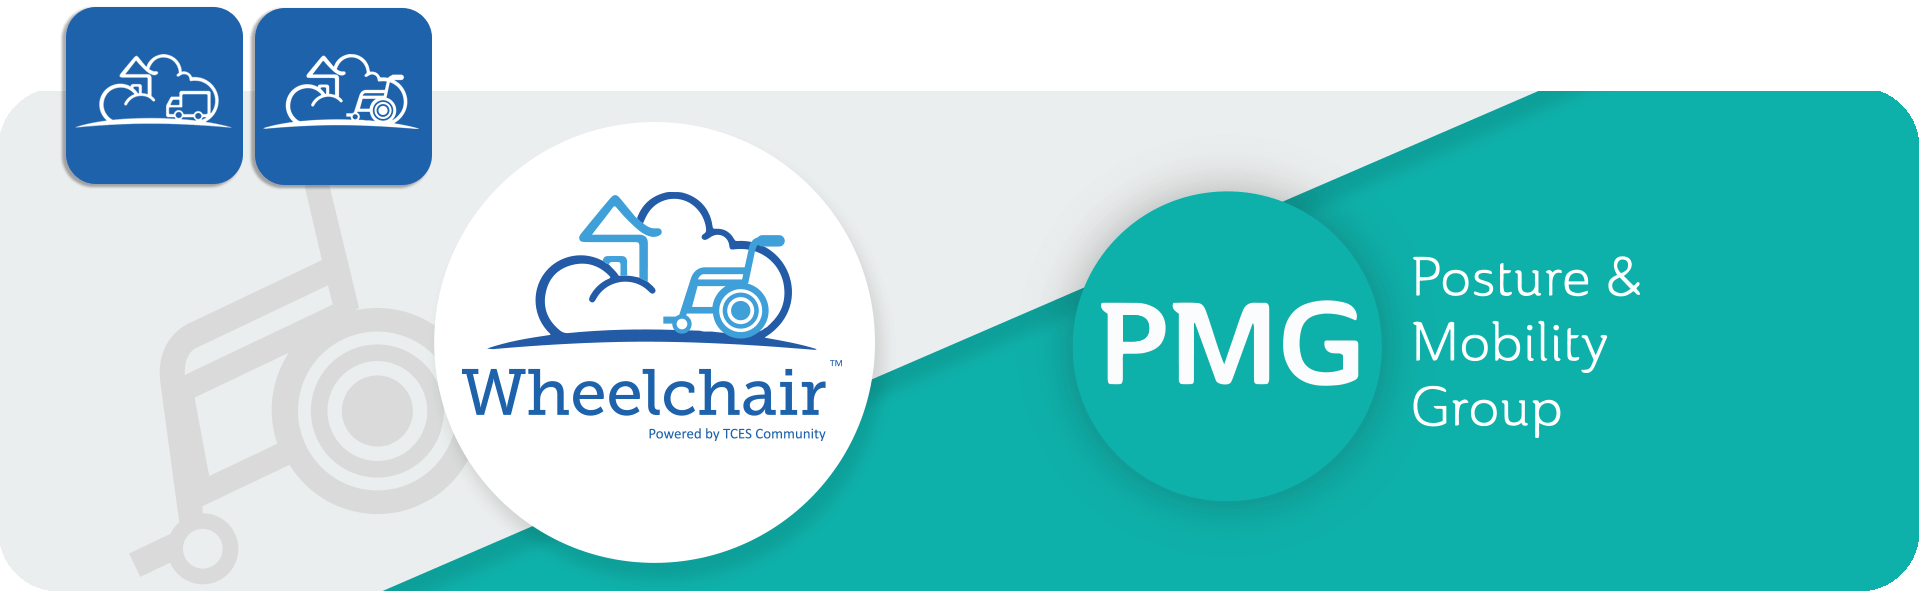 PMG logo and TCES Wheelchair